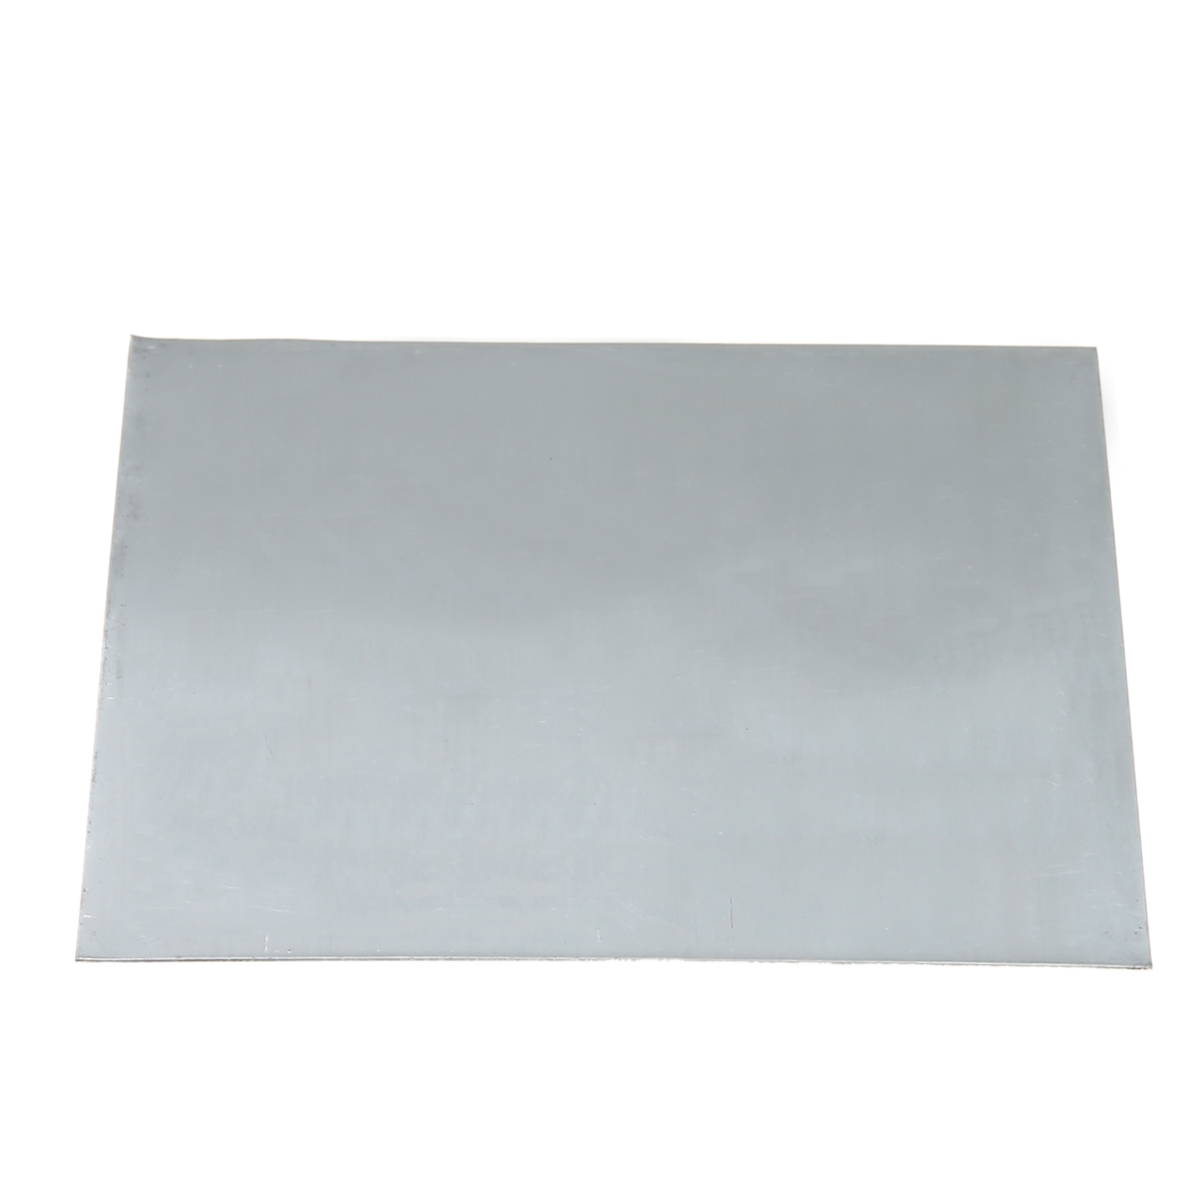 1pc 0.2mm Thickness 99.9% Pure Zinc Zn Sheet Plate 100mmx100mm For Science Lab Accessories